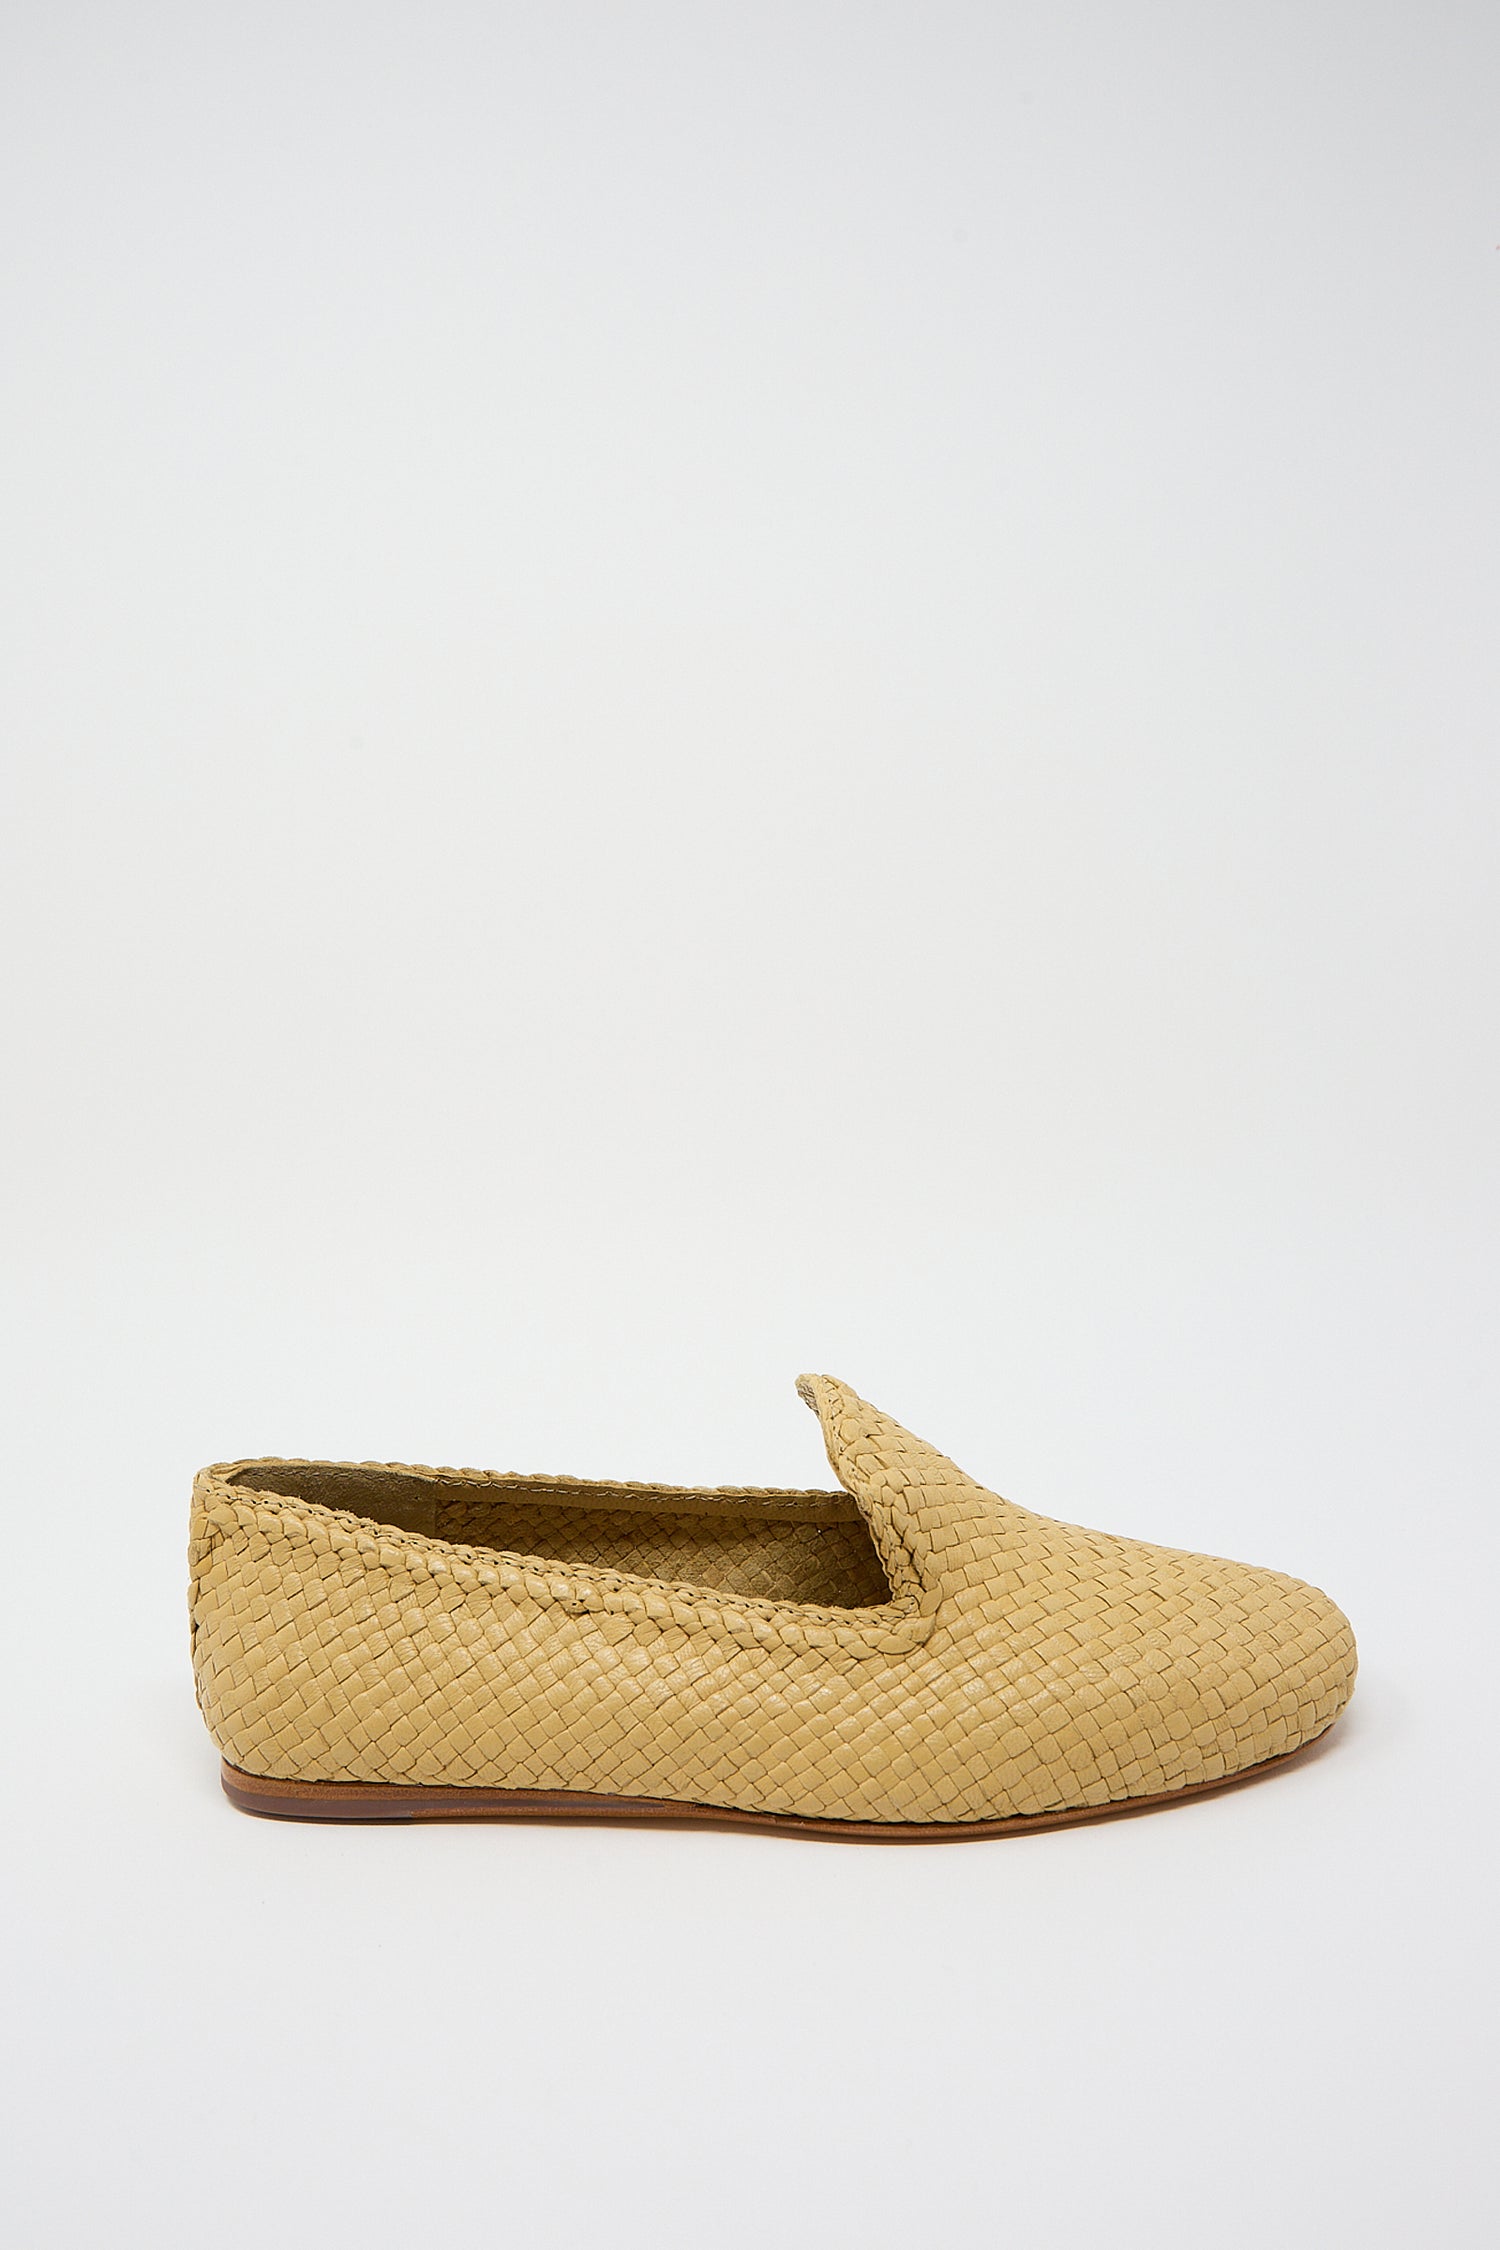 A single Damas Slipper in Natural handwoven goatskin leather slip-on slipper displayed against a white background by Dragon Diffusion. Side view.